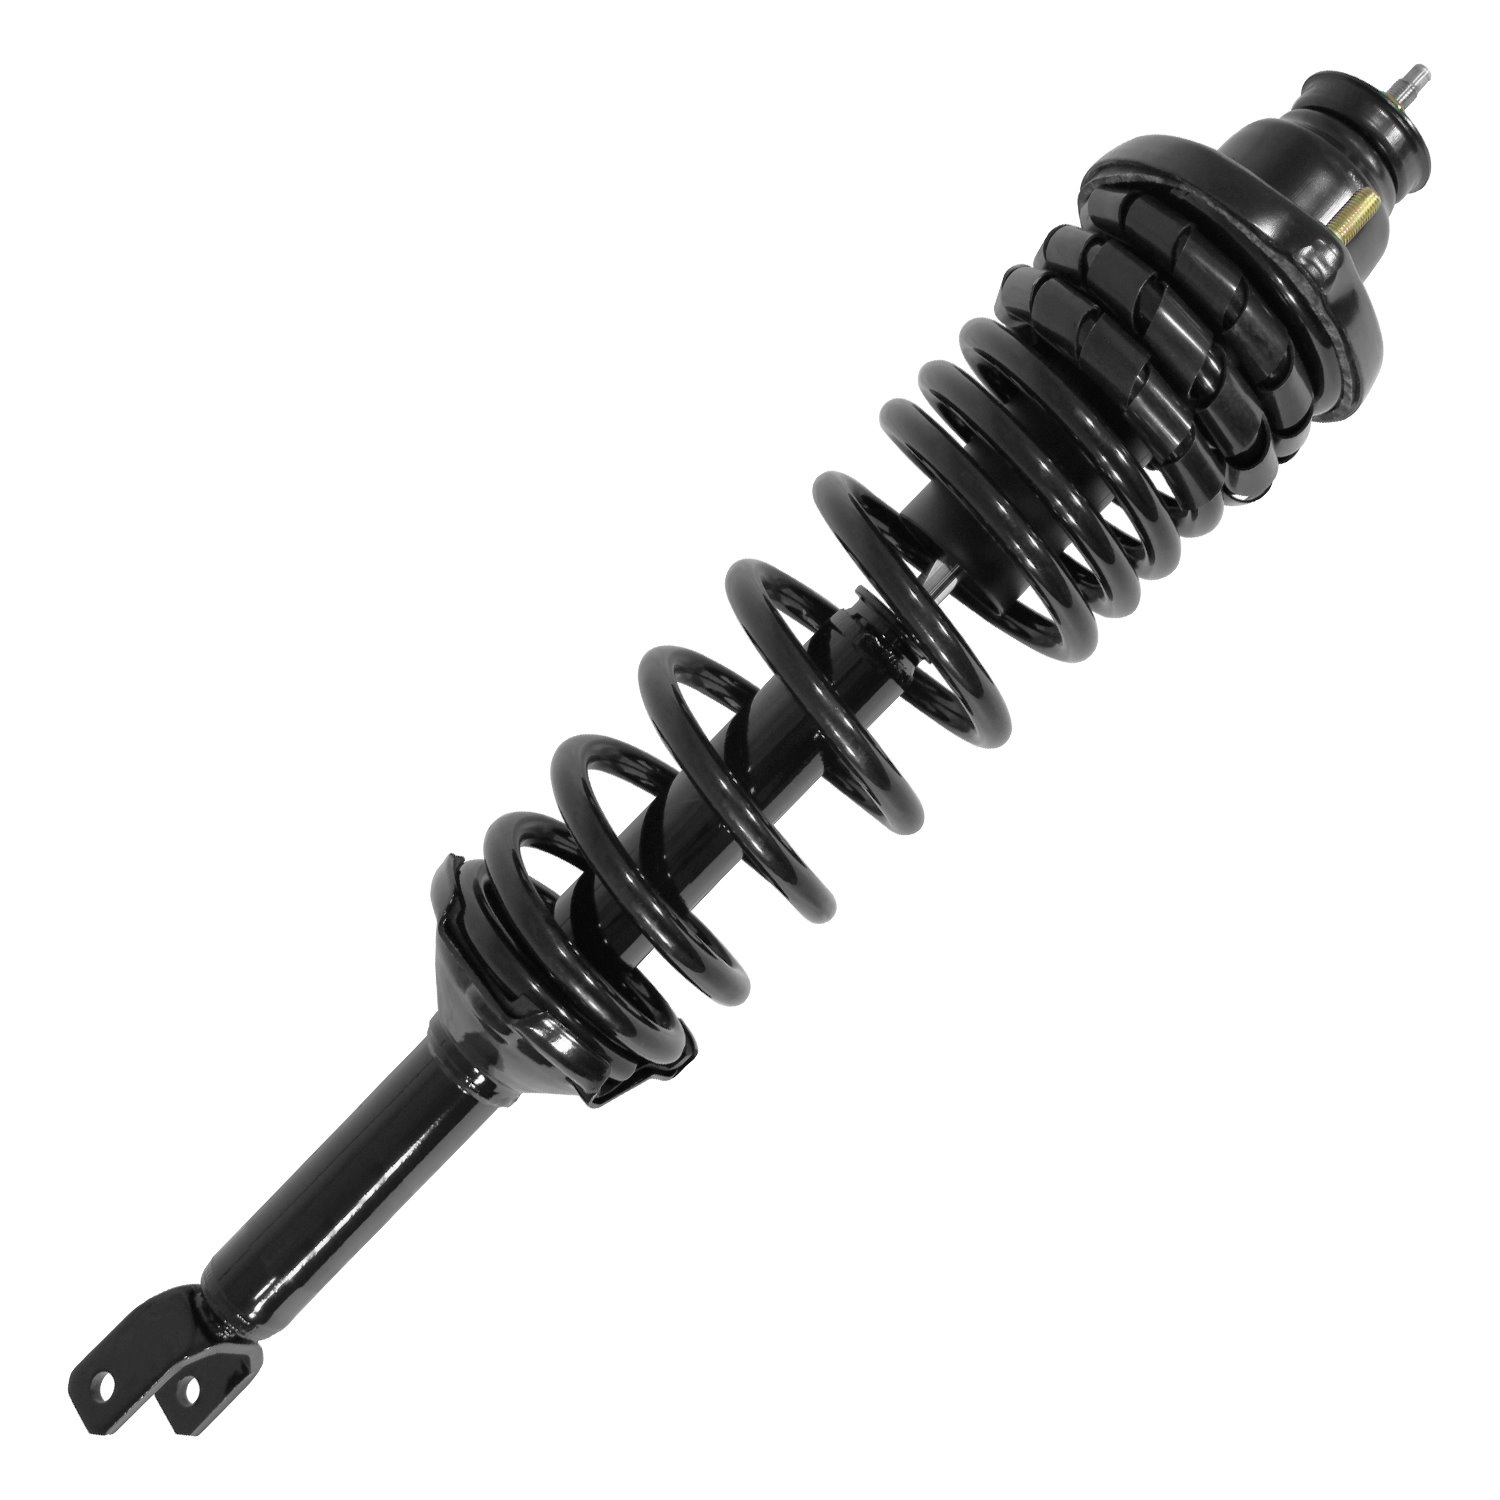 15141 Suspension Strut & Coil Spring Assembly Fits Select Acura CL, Honda Accord